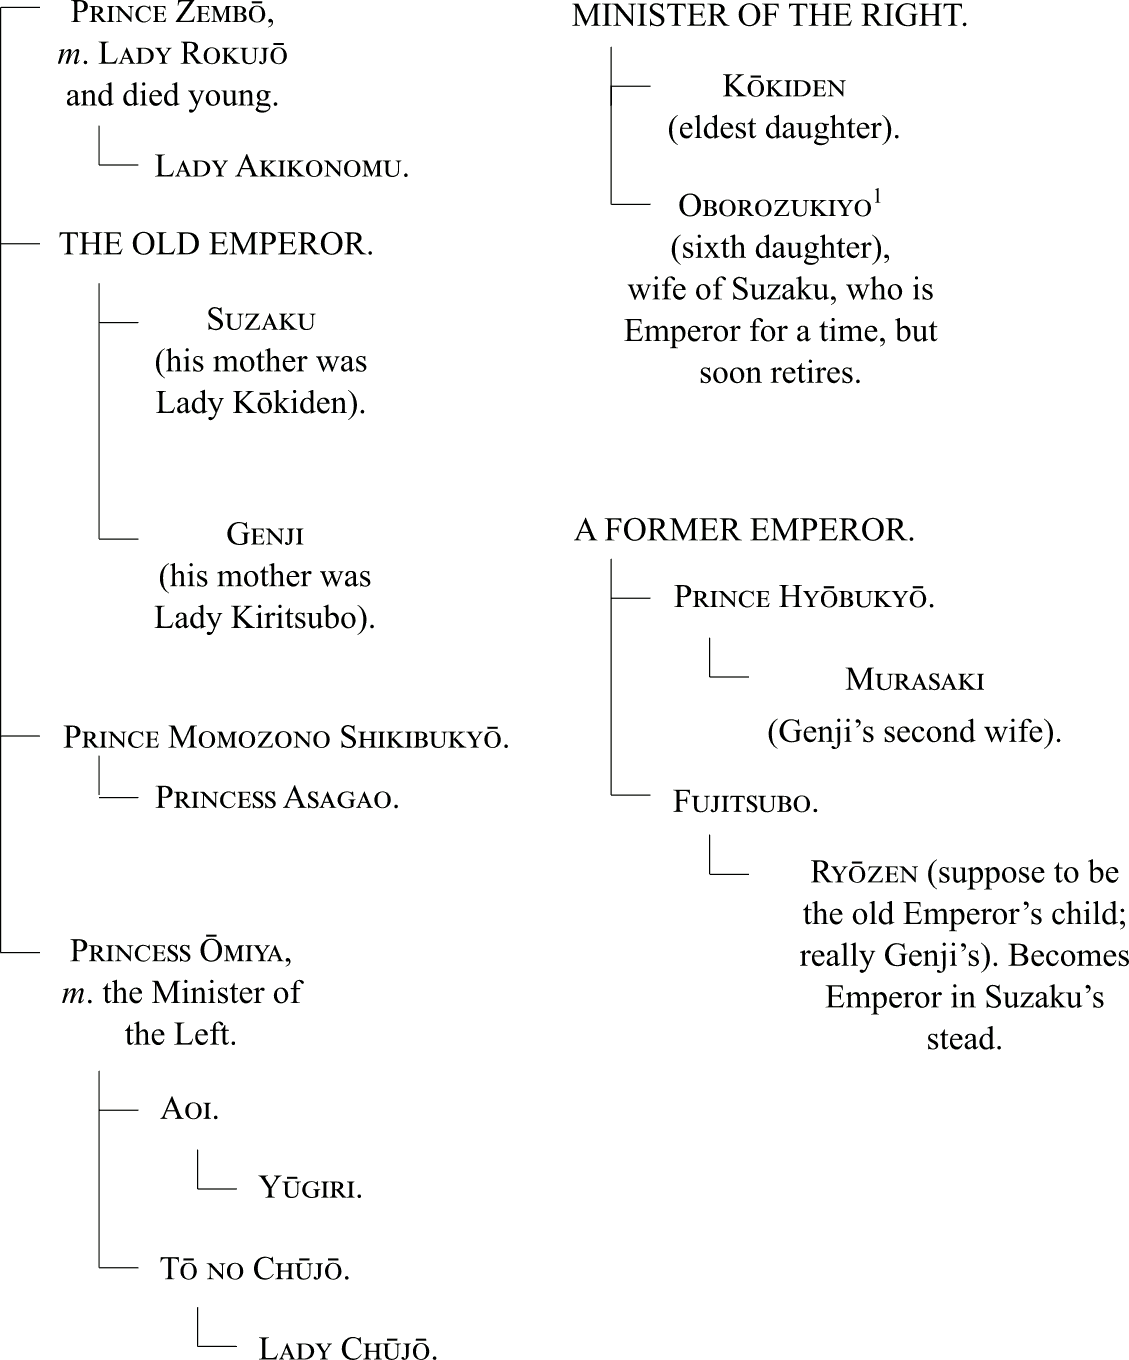 Genealogical graph of the Old Emperor’s siblings, the Minister of the Right’s family, and a former emperor’s family